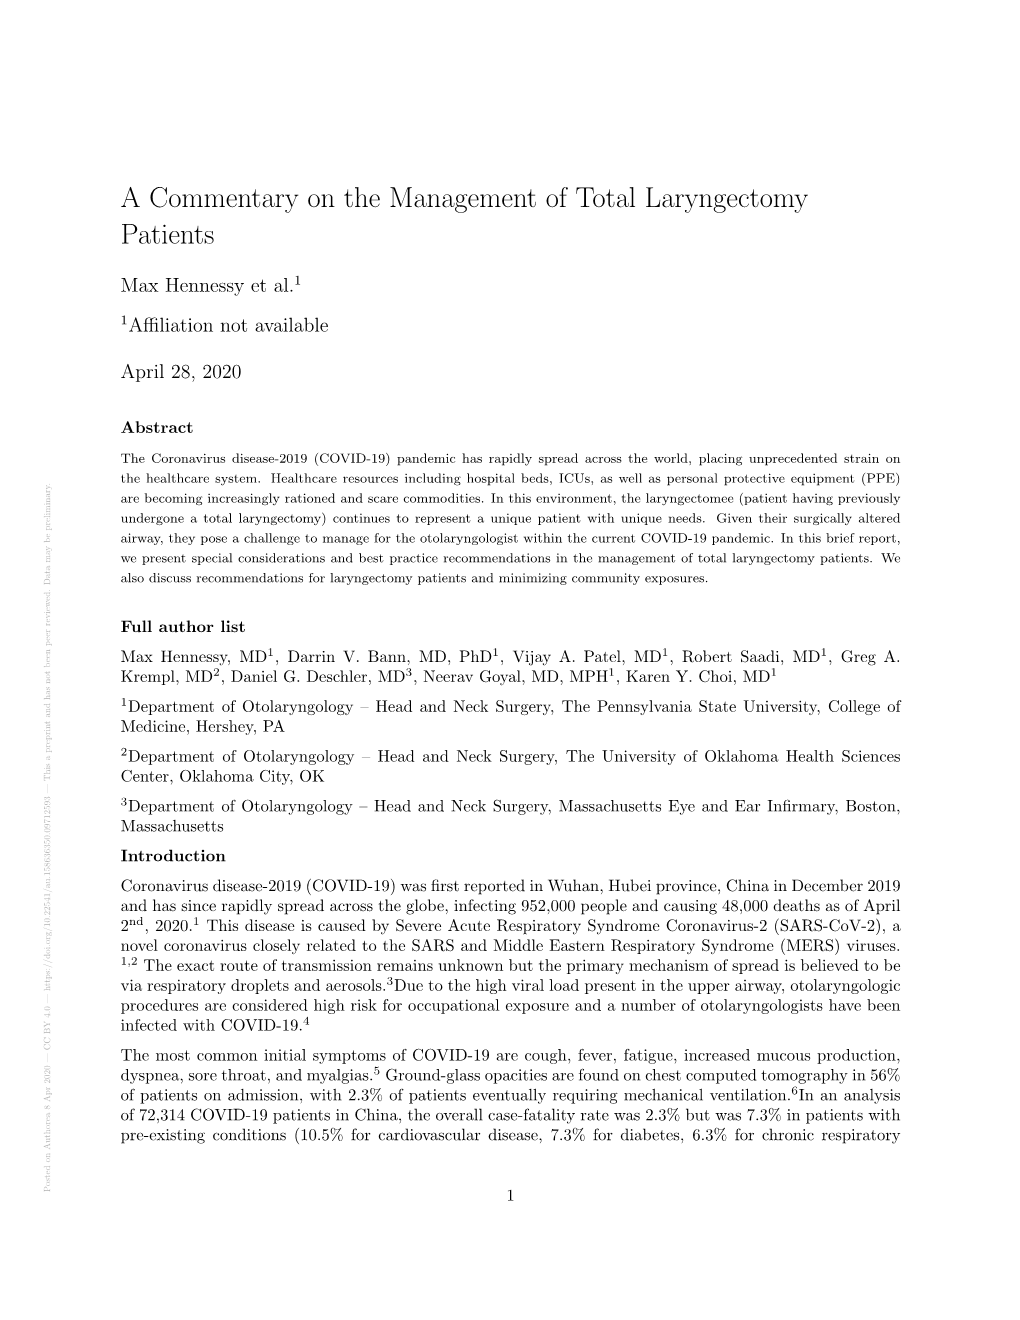 A Commentary on the Management of Total Laryngectomy Patients